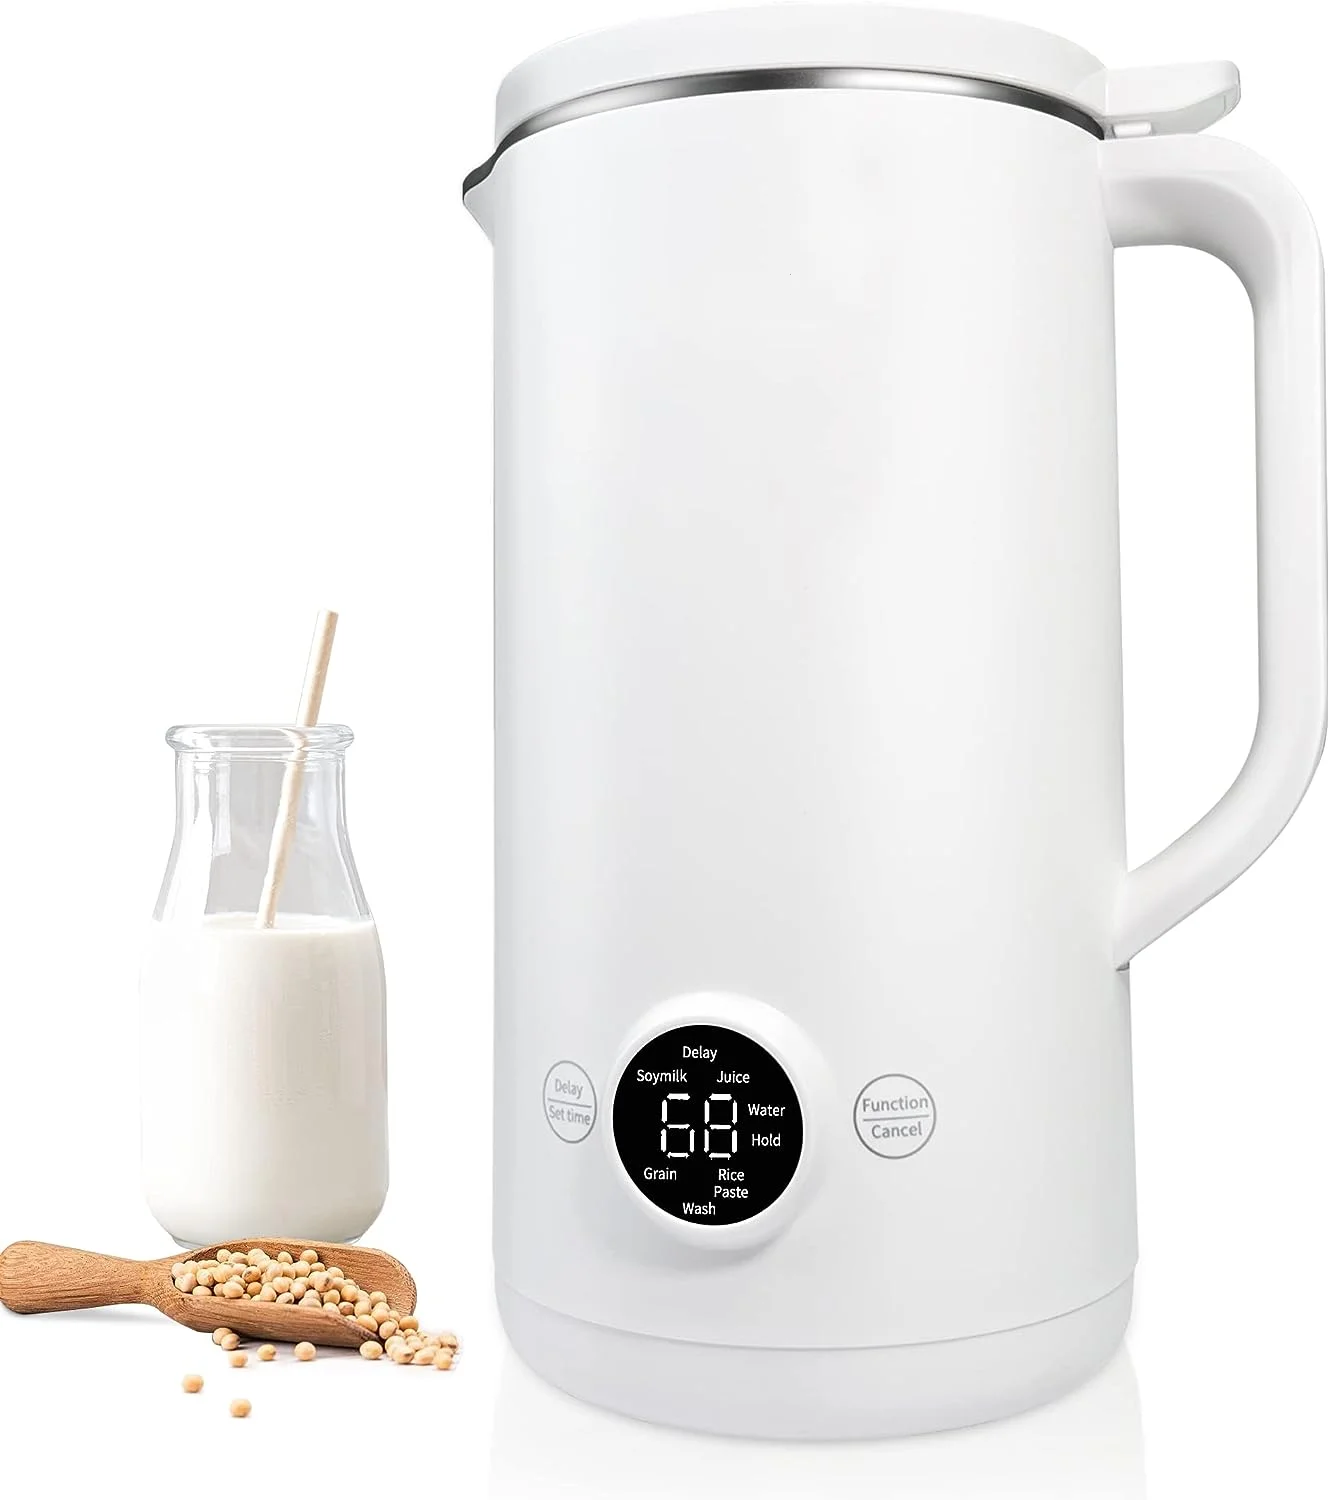 

Automatic Soy Milk Maker, 20oz Homemade Nut/Almond/Oat/ Plant-based Milks & Dairy Free Beverages Machine with Mesh Strainer, Lic